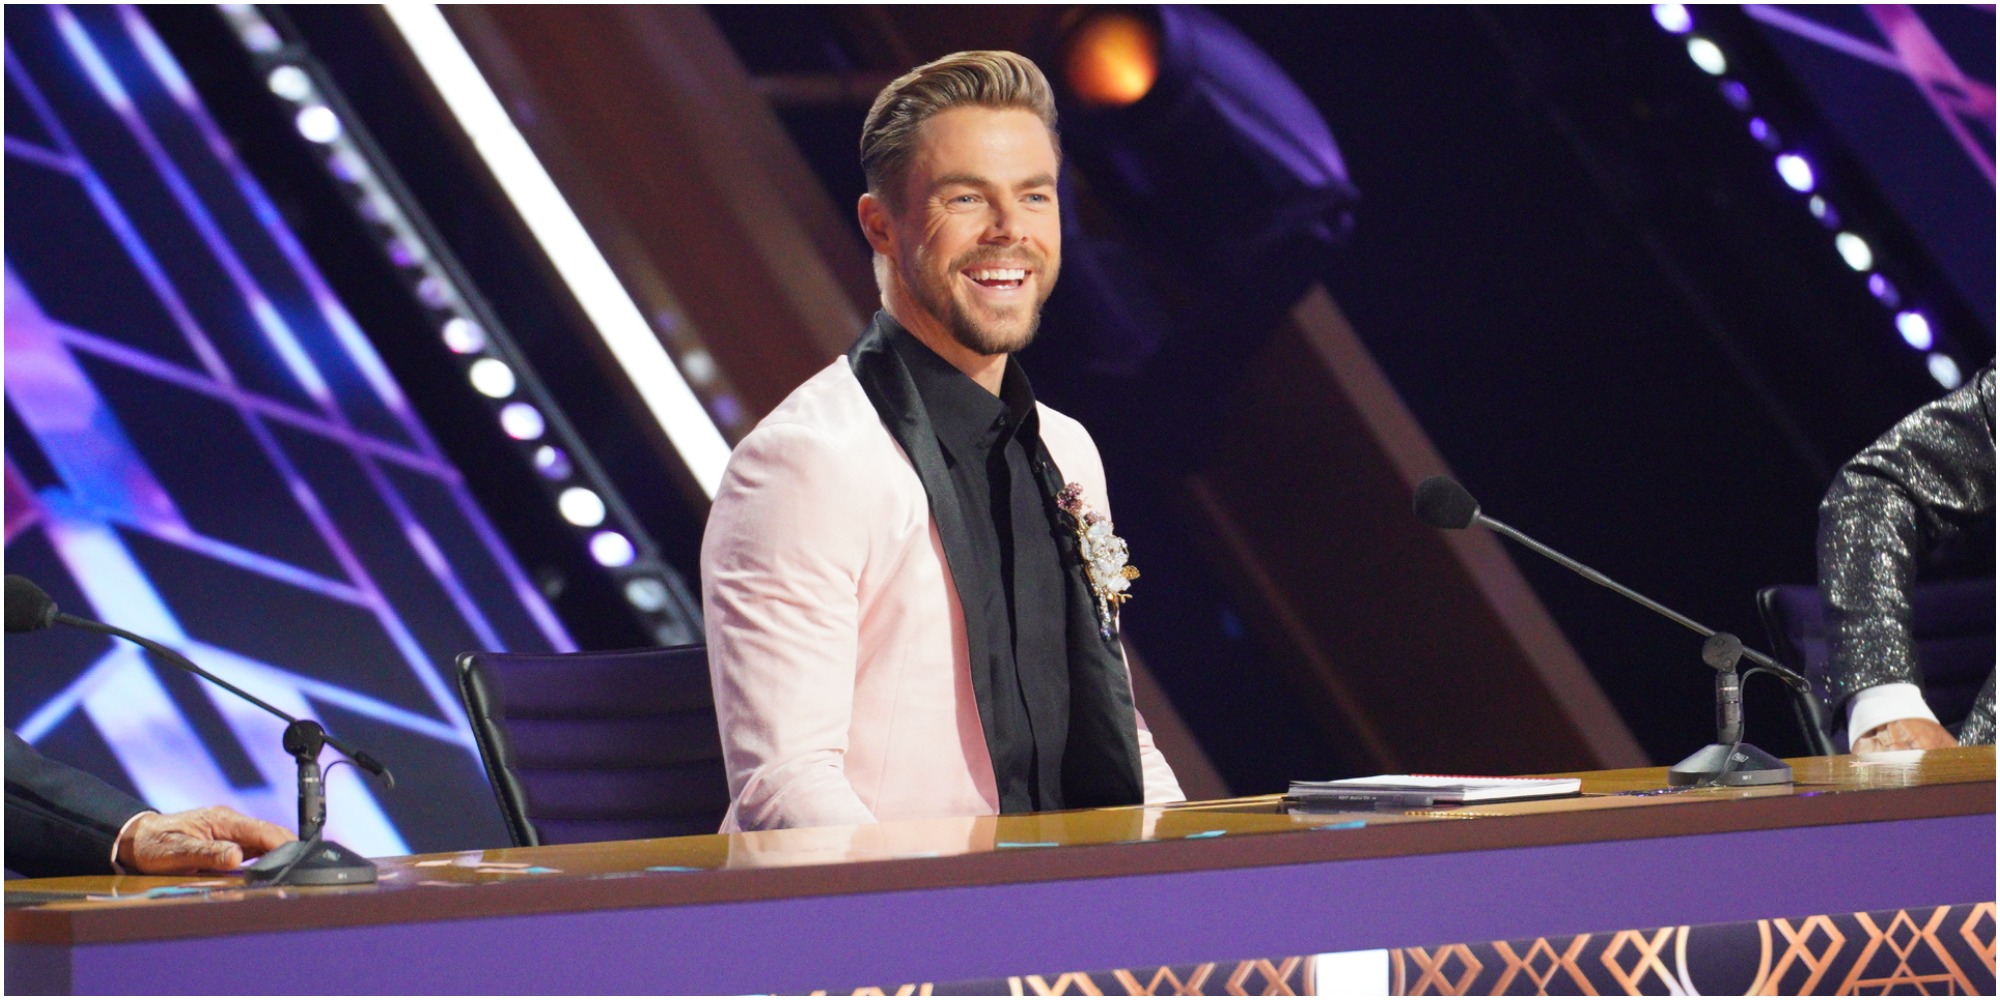 Derek Hough is seated behind the judges table on the set of "Dancing with the Stars."